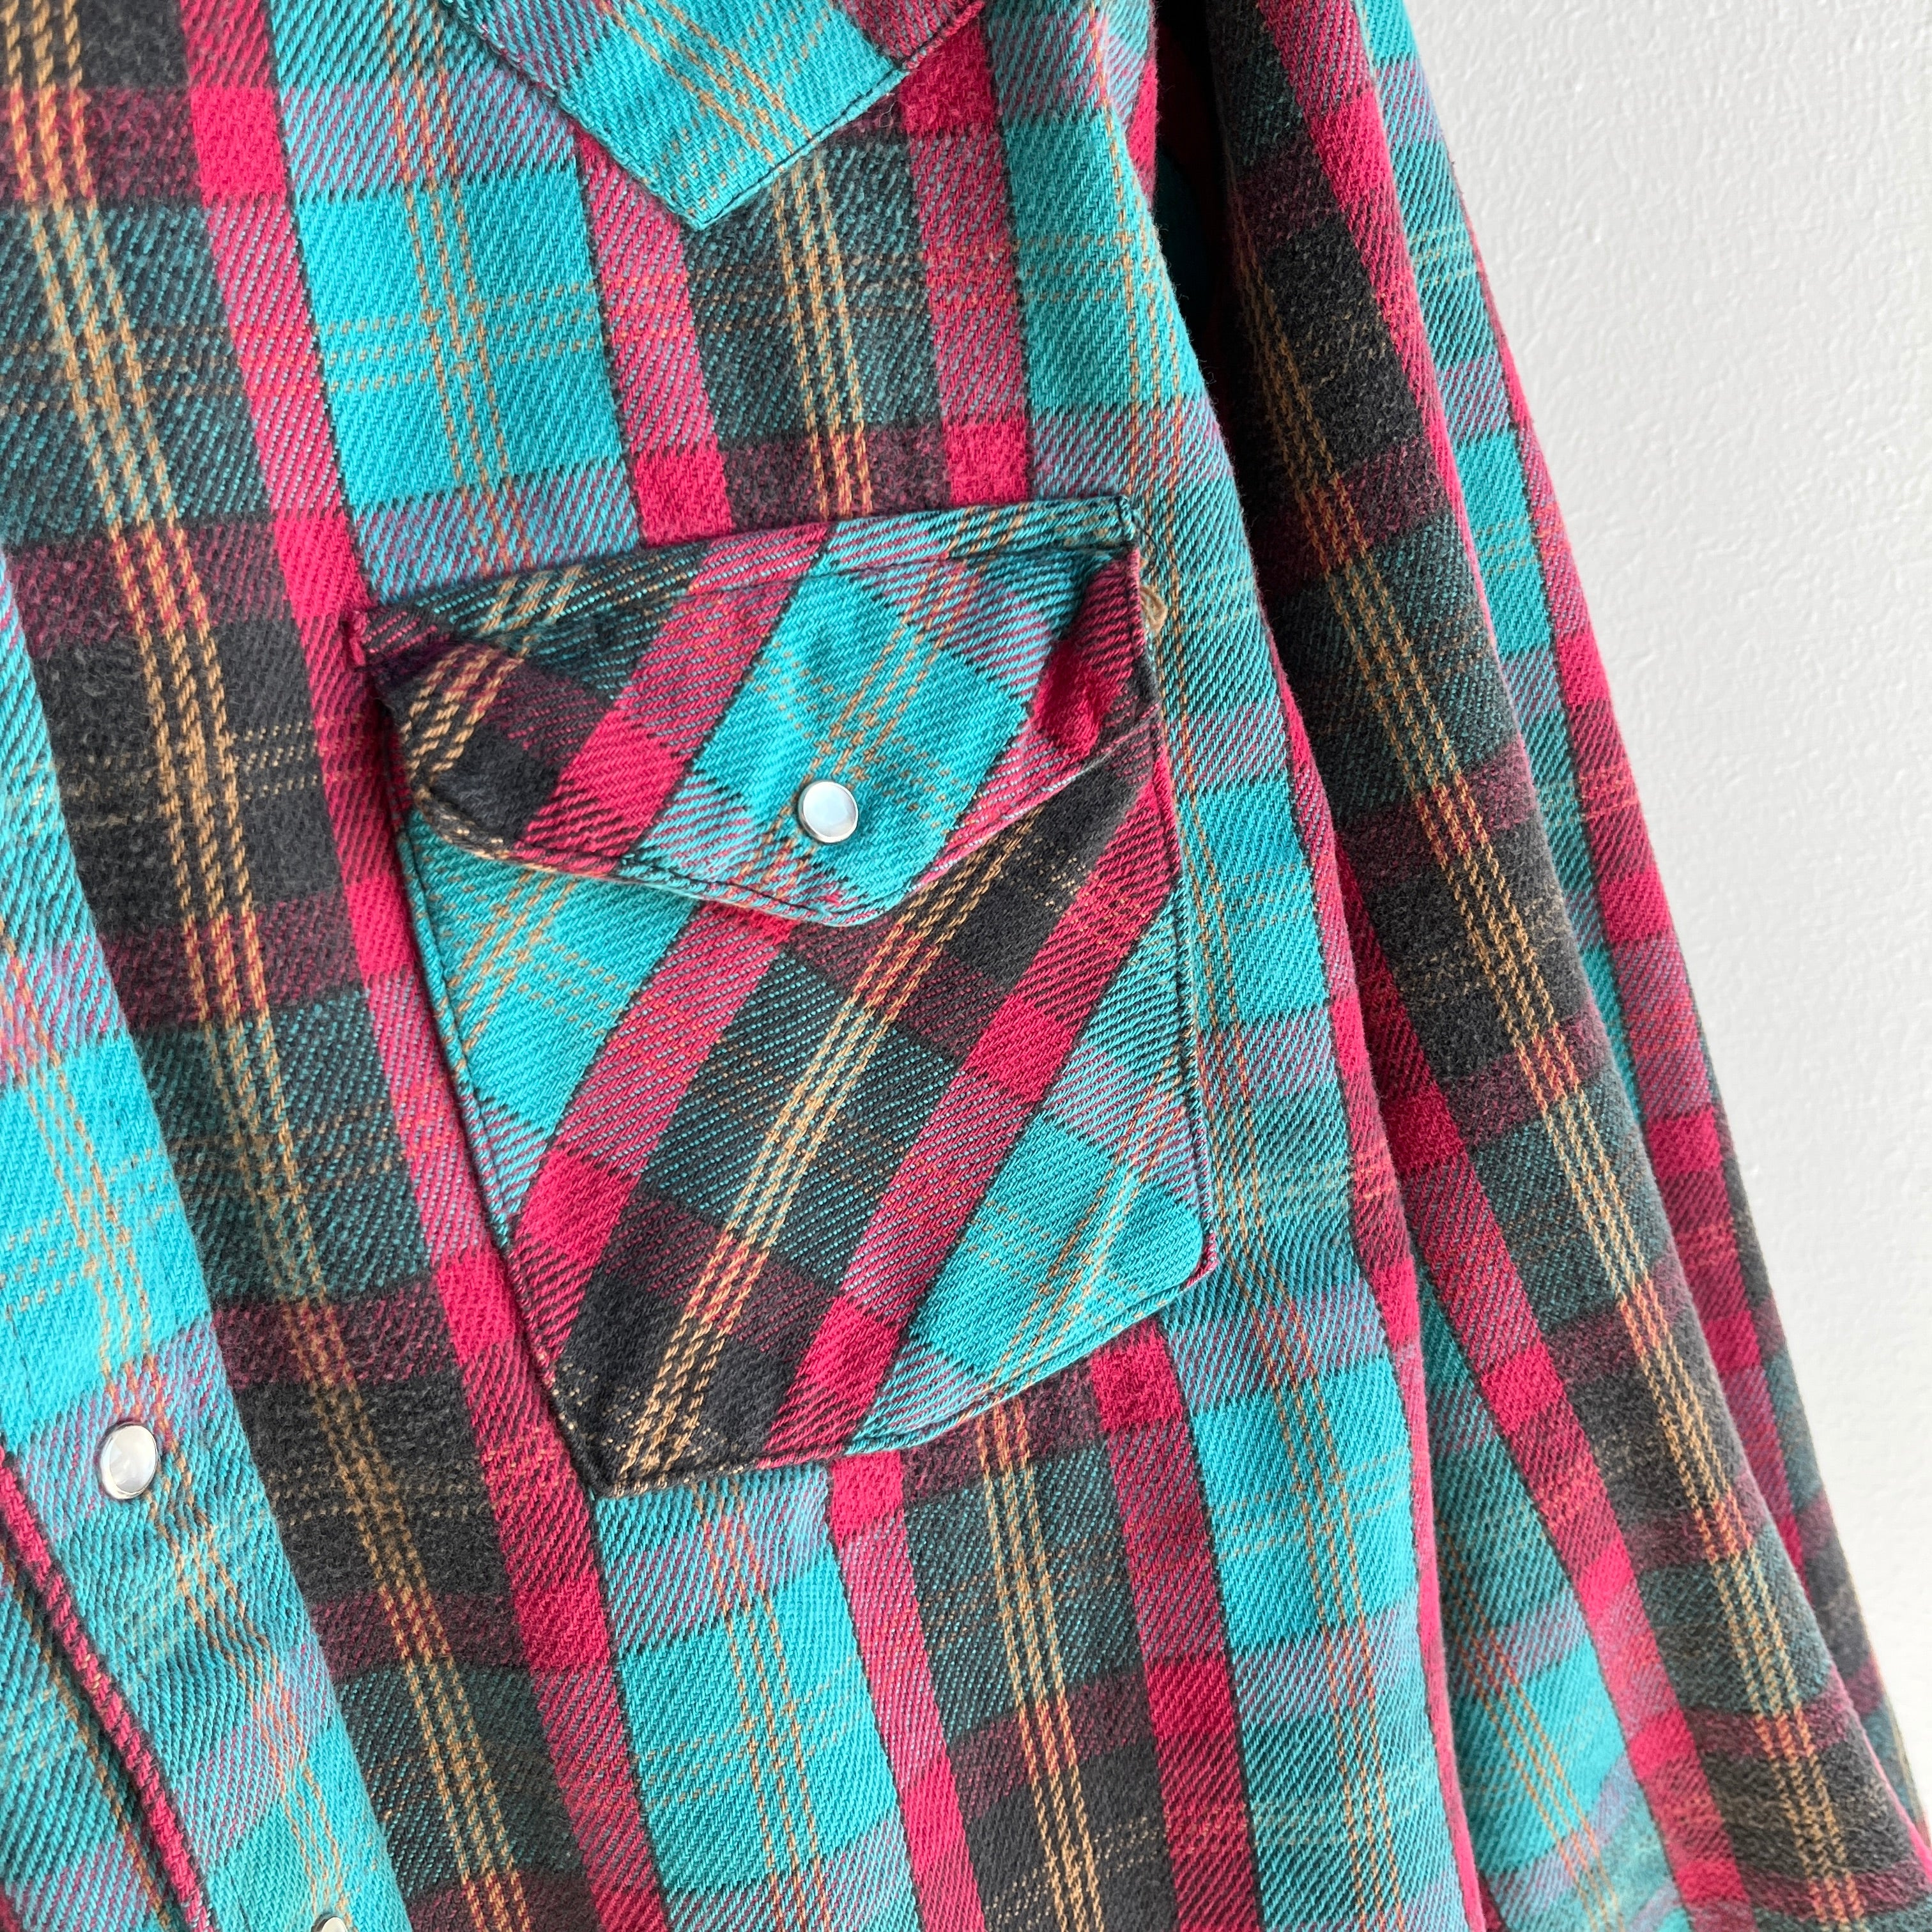 1990s Larger Relaxed Fit Osh Kosh Cotton Cowboy Flannel Jacket (?)